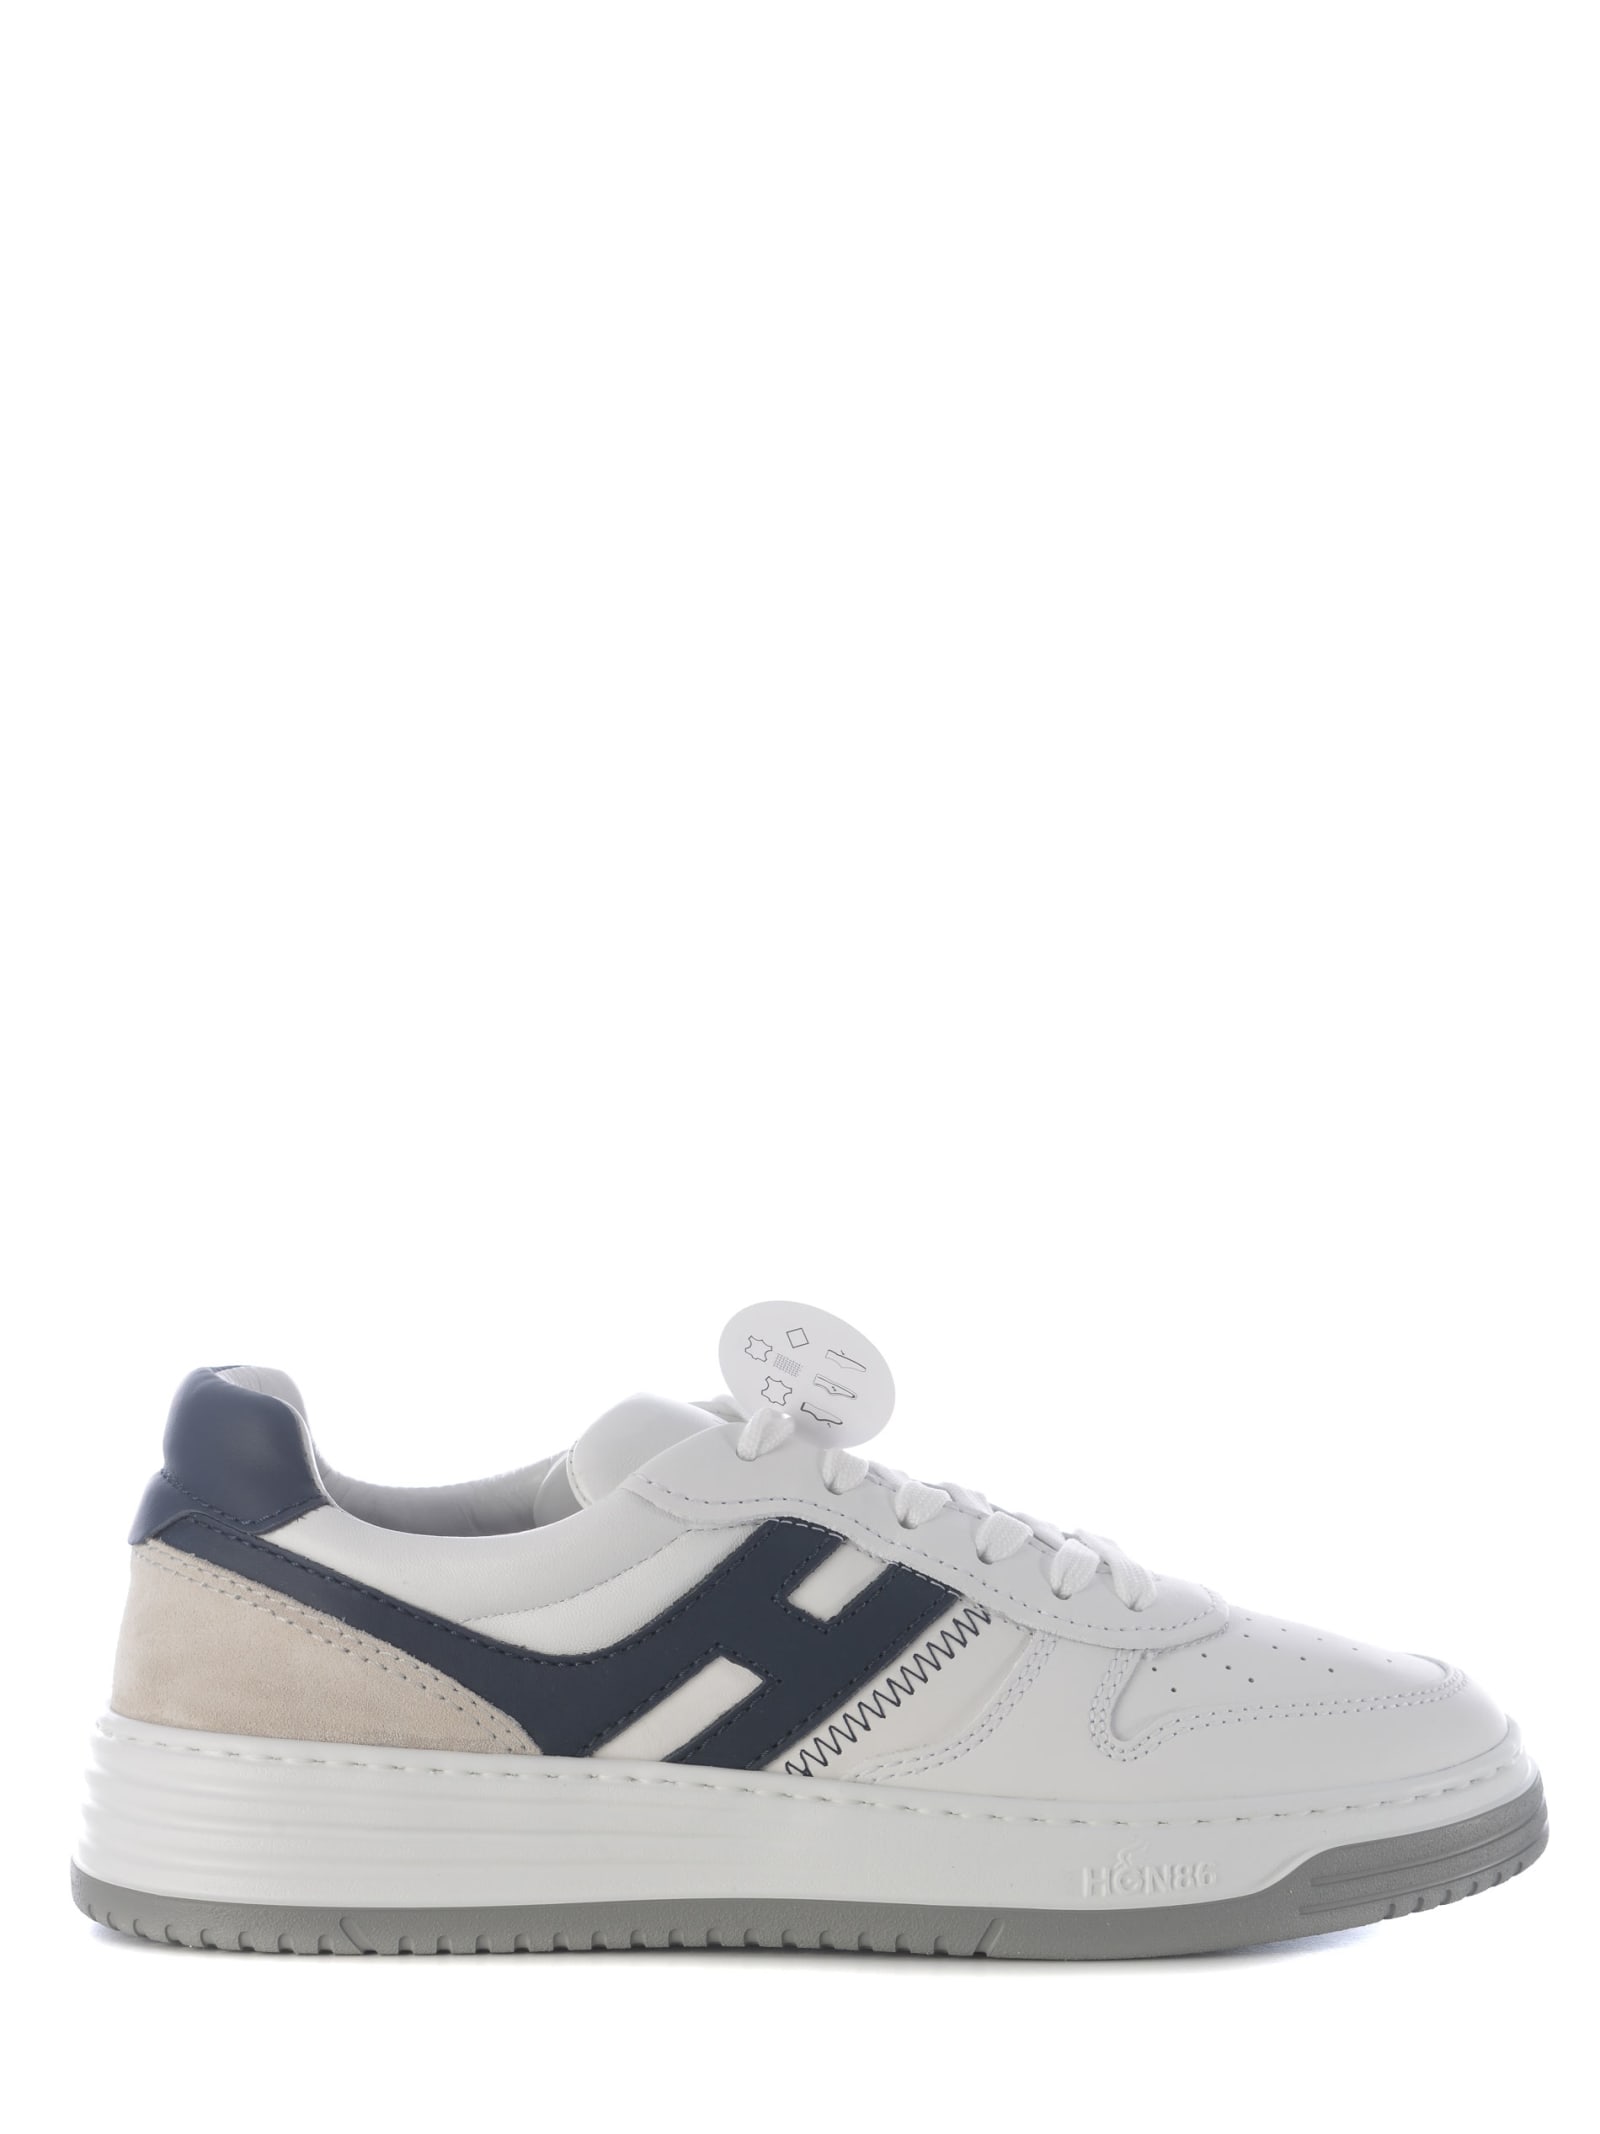 Hogan Sneakers  H630 In Leather In White